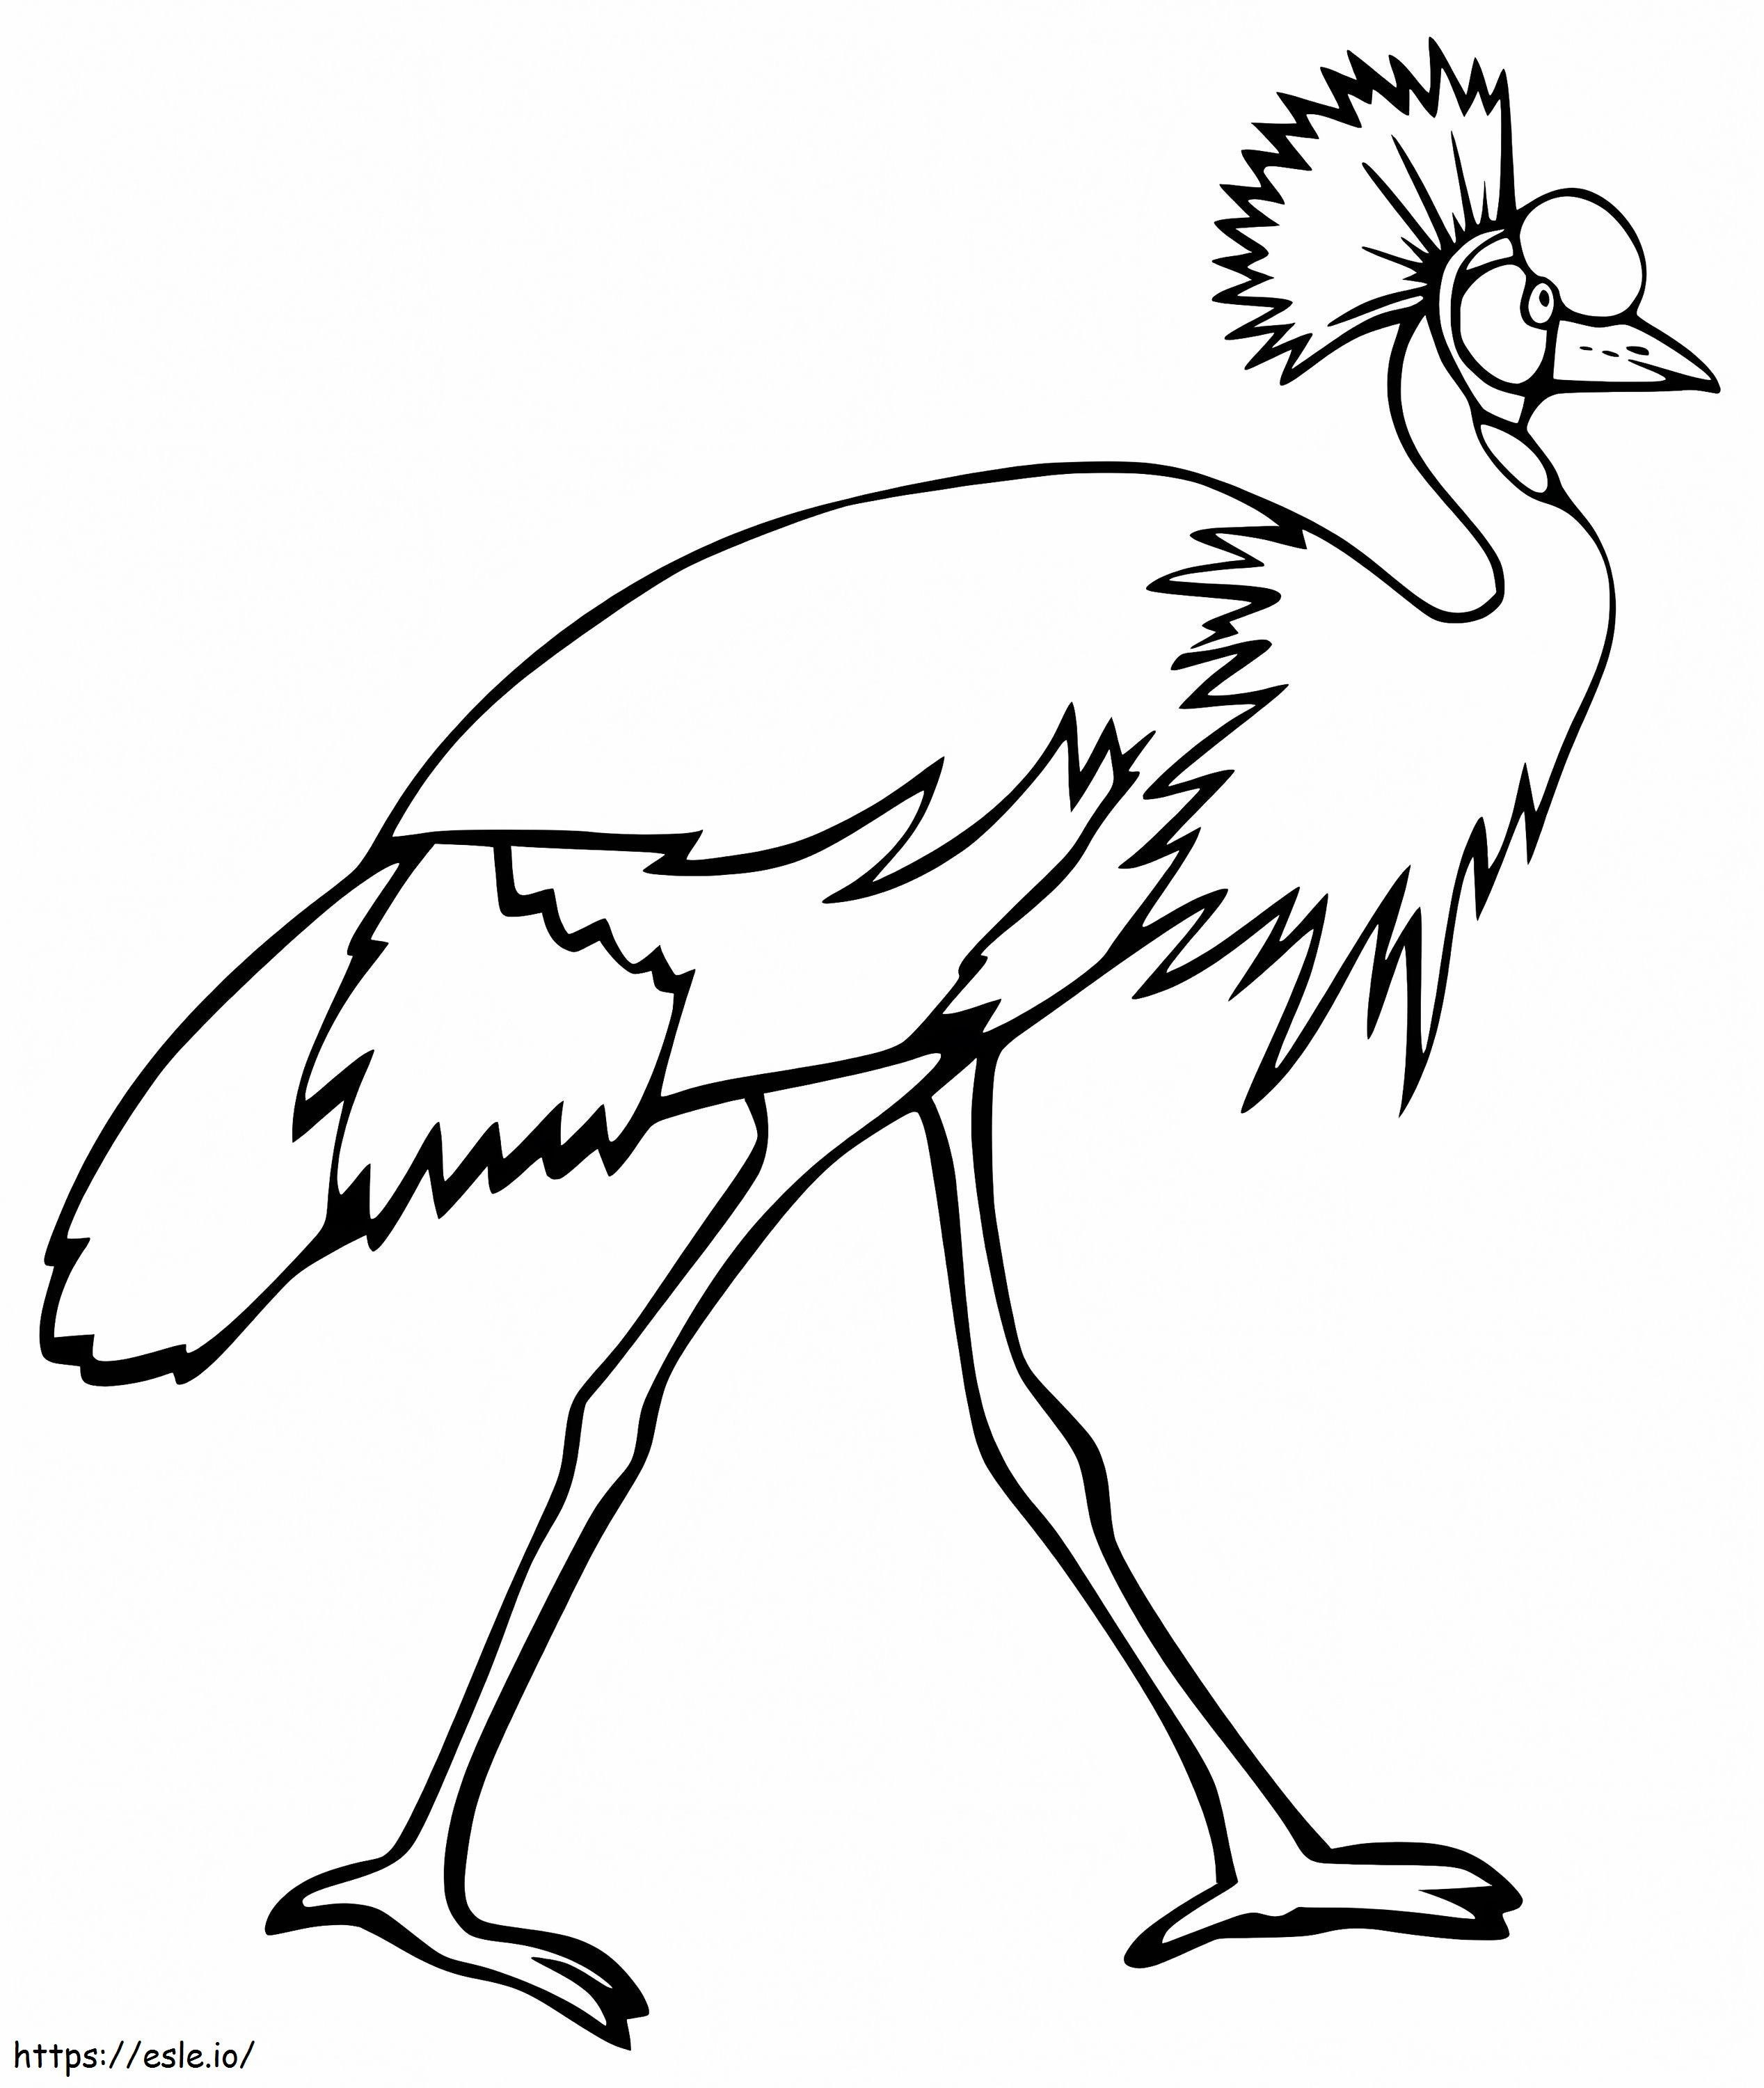 Printable Cassowary coloring page